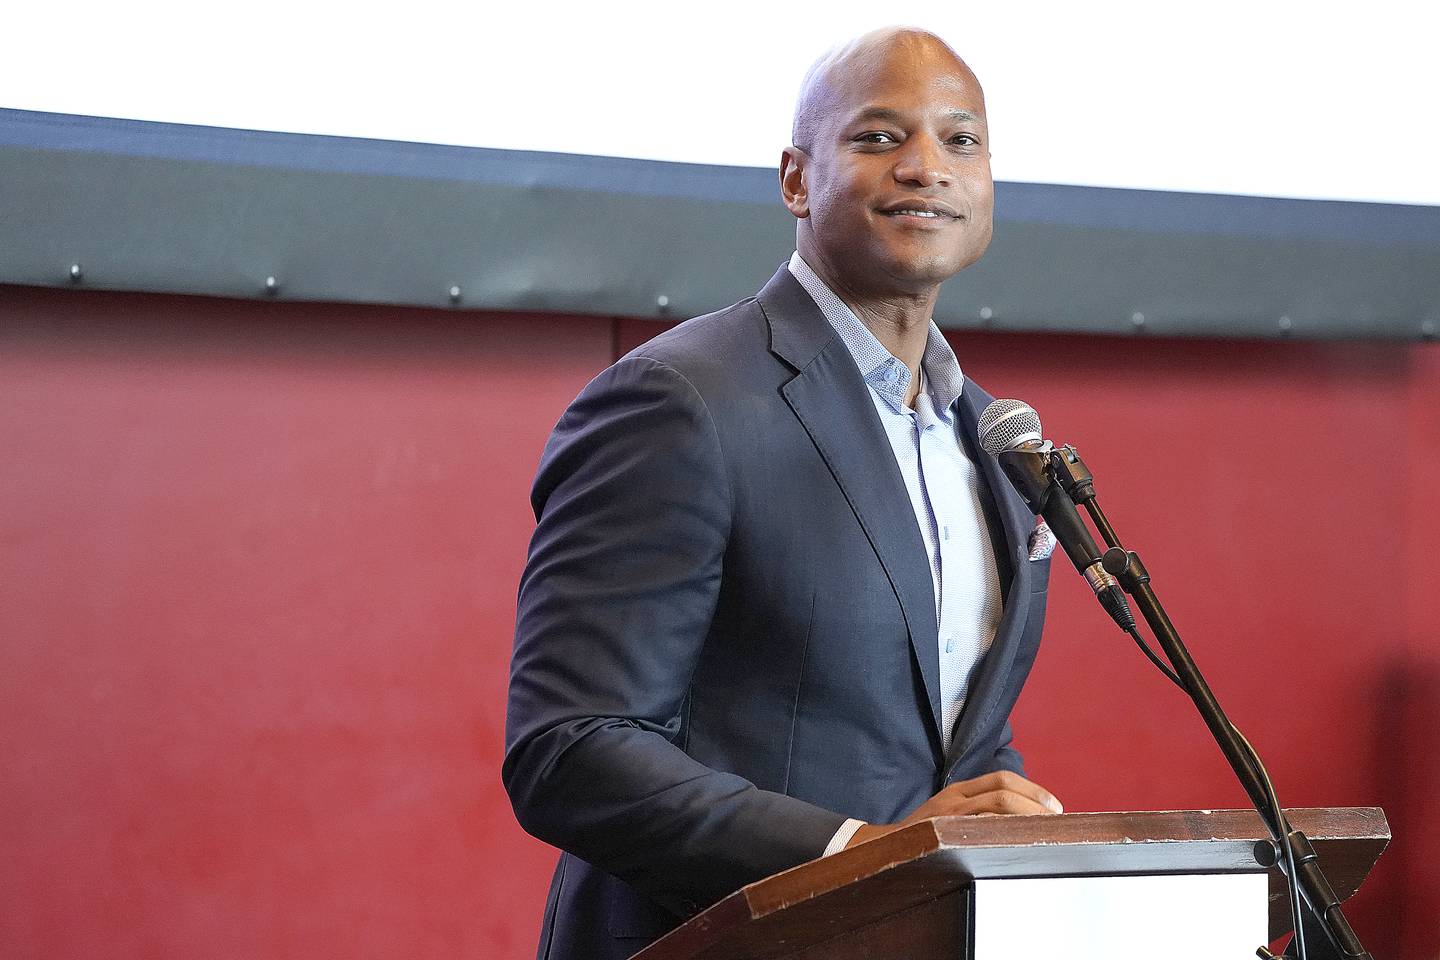 Democratic candidate for Maryland Governor Wes Moore and running mate for Lt Governor, Aruna Miller, held  fundraiser at Reginald F. Lewis Museum